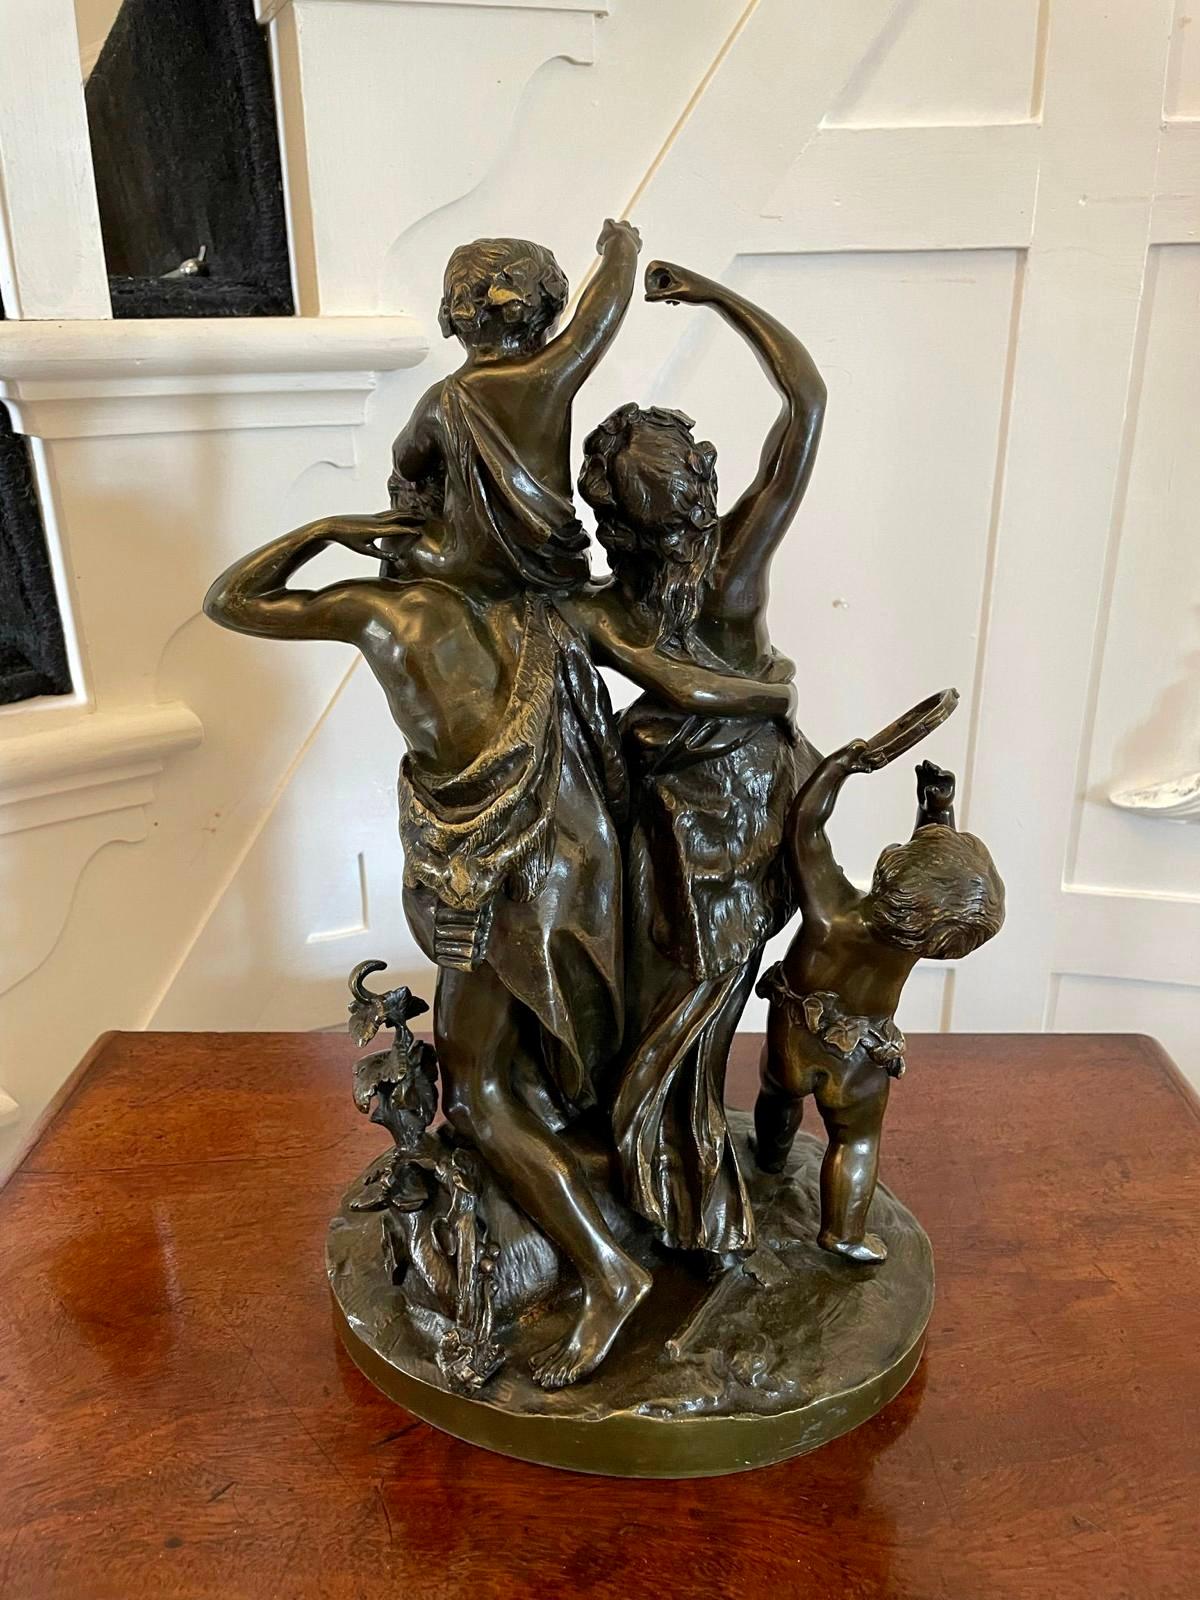 A very impressive astounding quality antique 19th century bronze Clodion statue of a pair of classical Bacchus influenced dancing maidens with their children holding a tambourine, signed by Clodian

A glorious piece displaying incredible detail